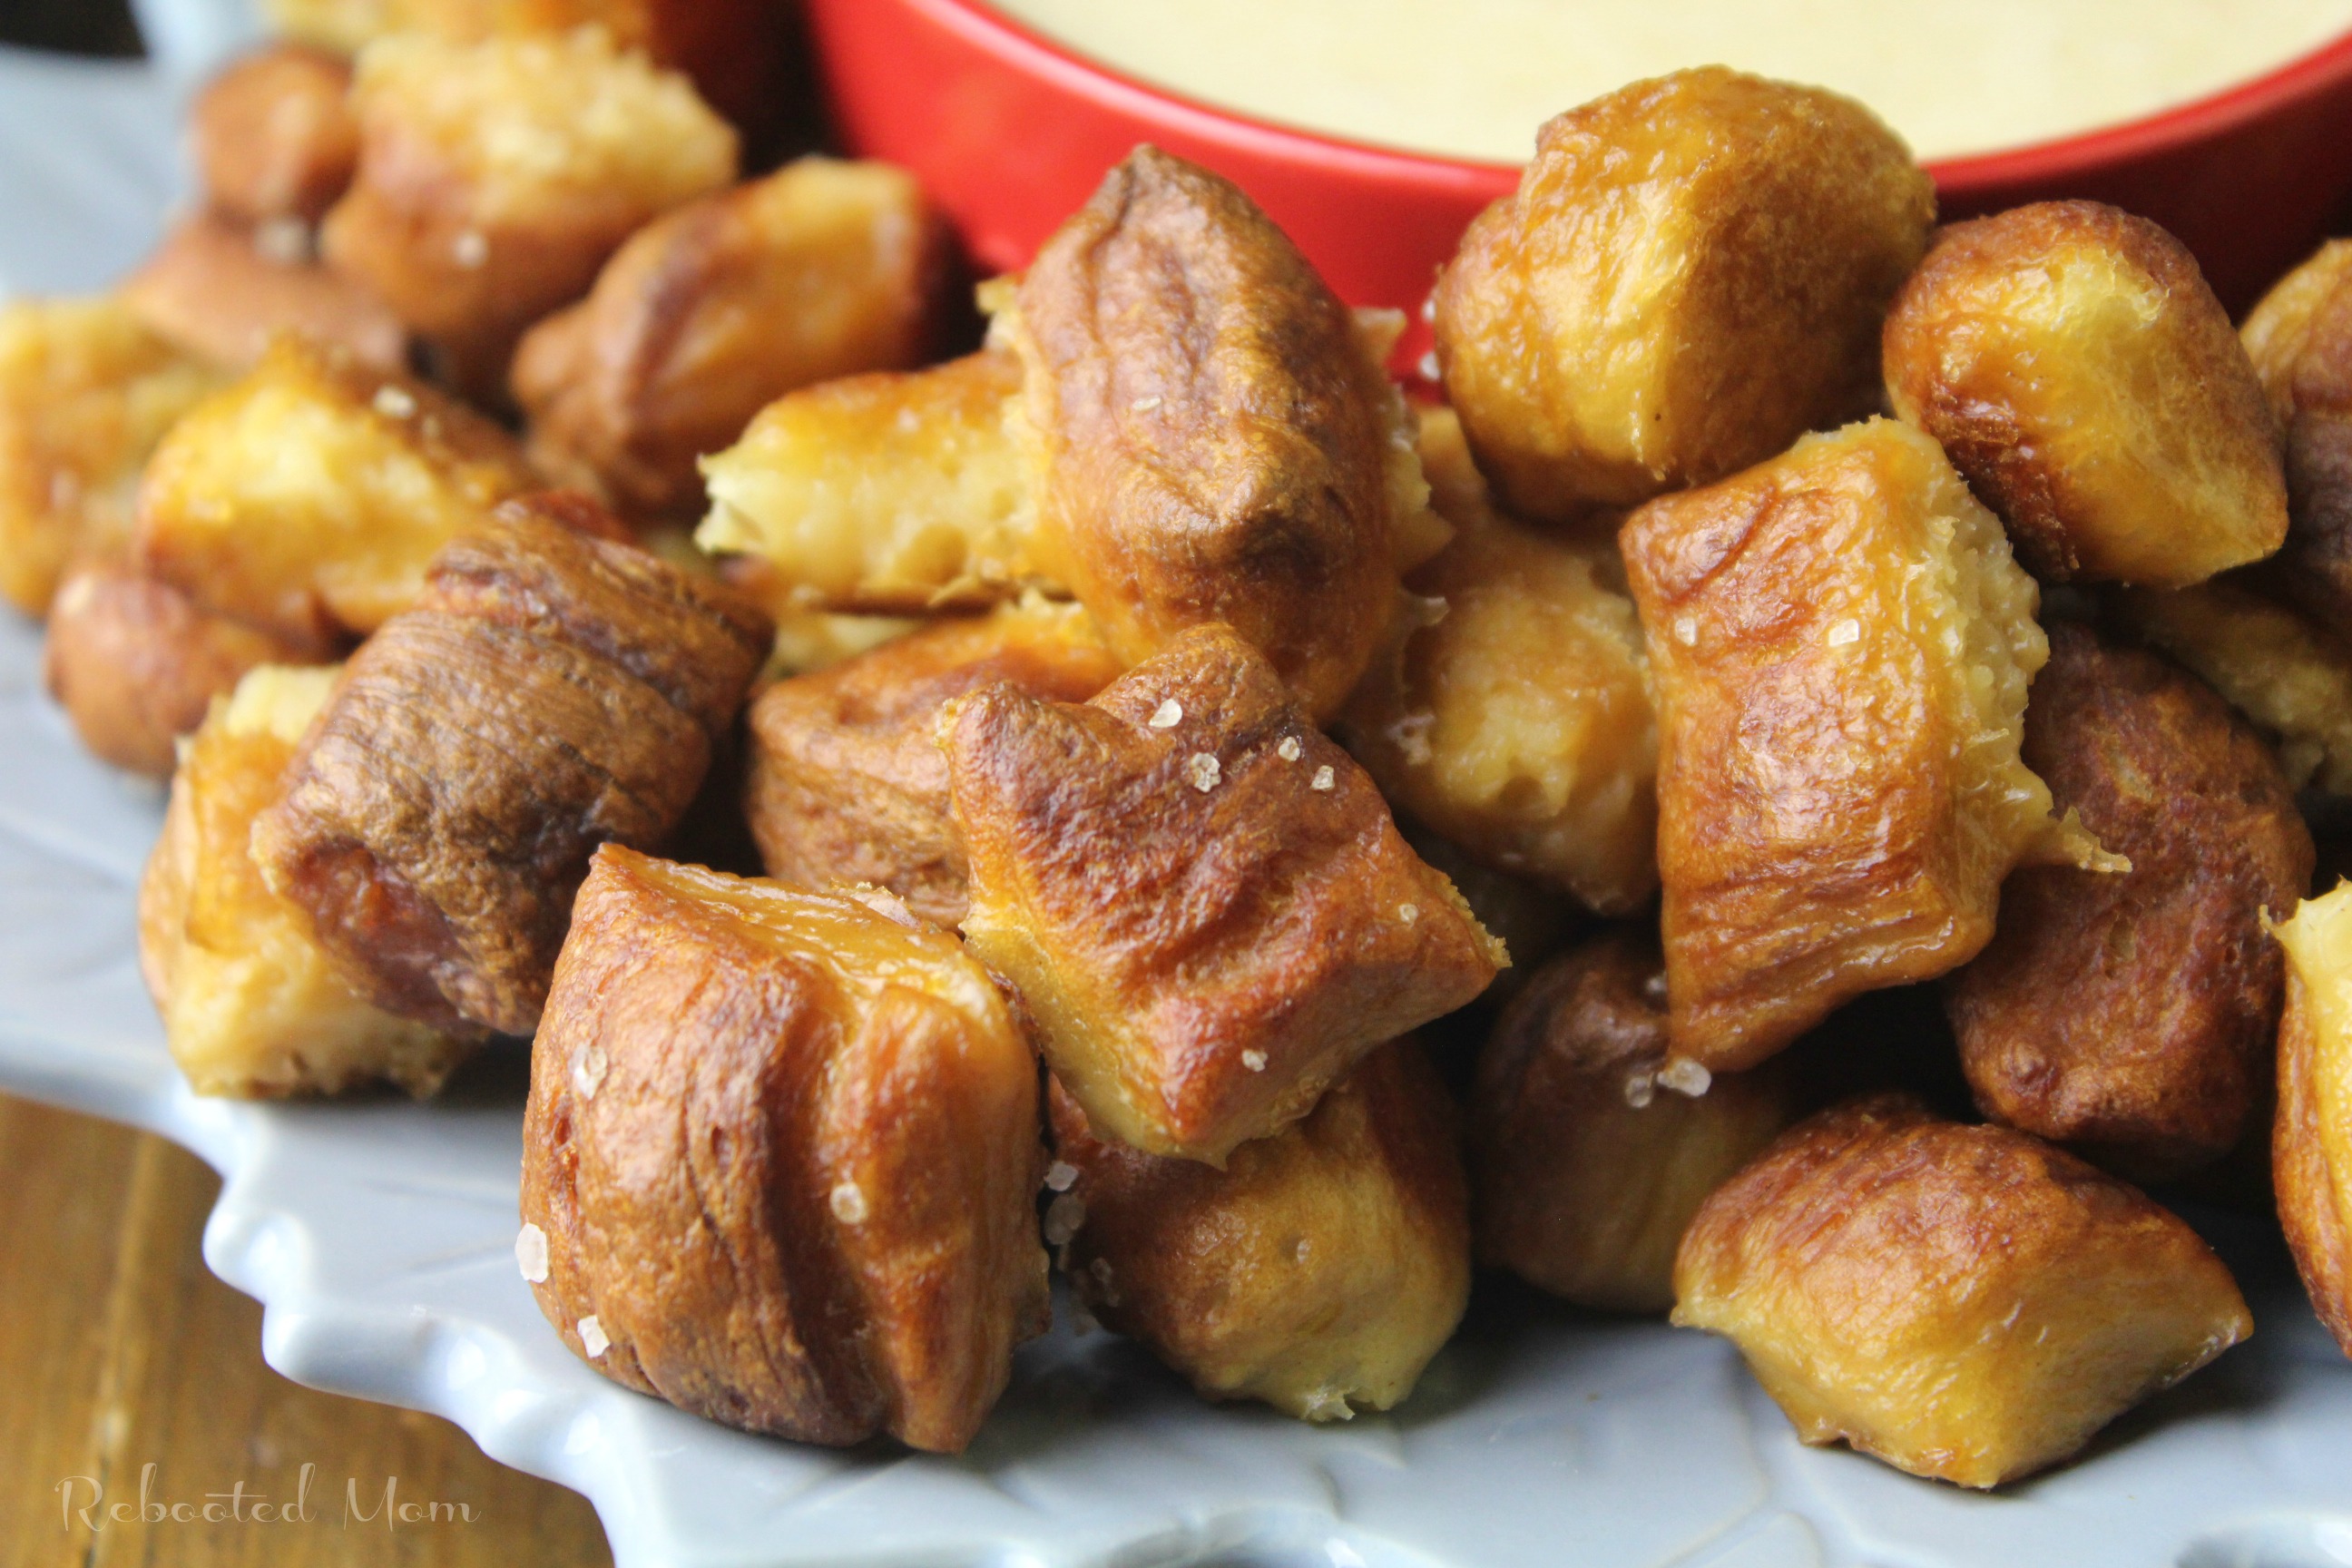 These yummy pretzel bites are simple to whip up and delicious when served as an appetizer or snack. You won't believe how easy they are to make at home!